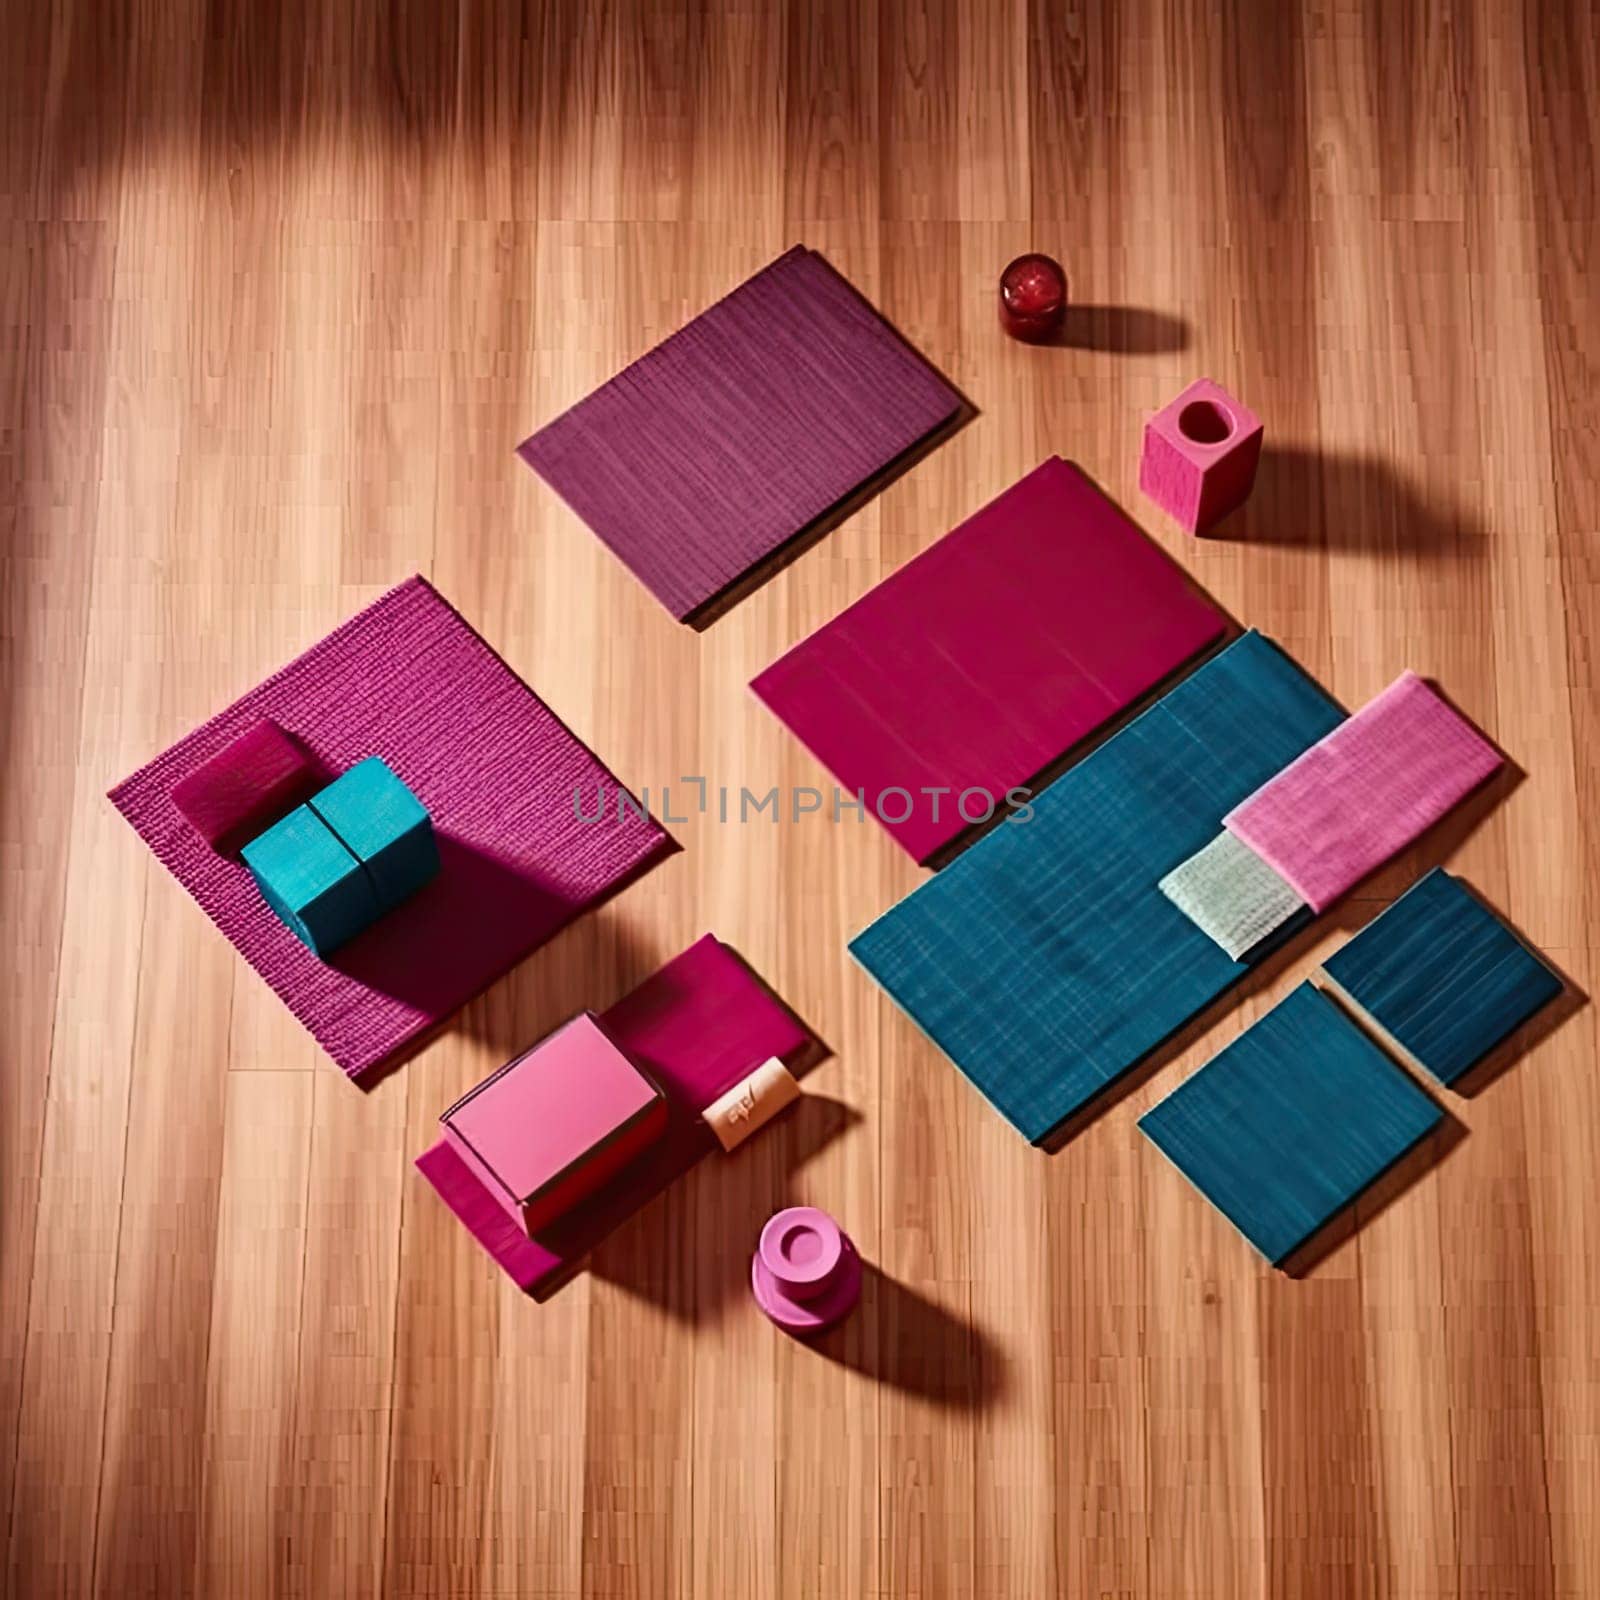 Colorful yoga mats on a wooden floor in a fitness studio by eduardobellotto